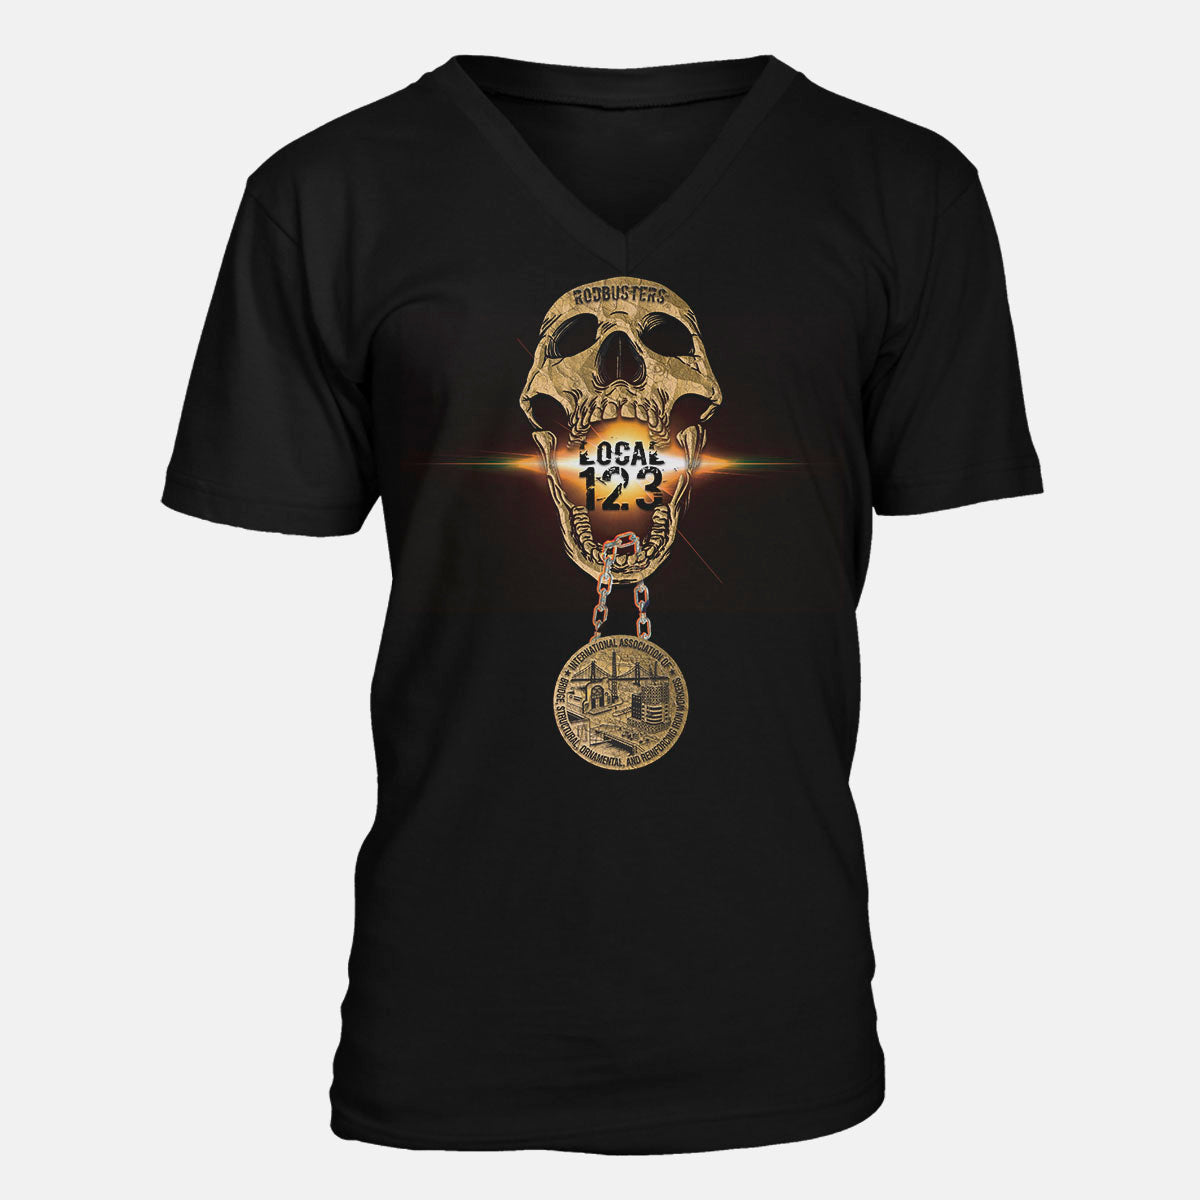 IW Rodbusters Skull Medallion Union Apparel